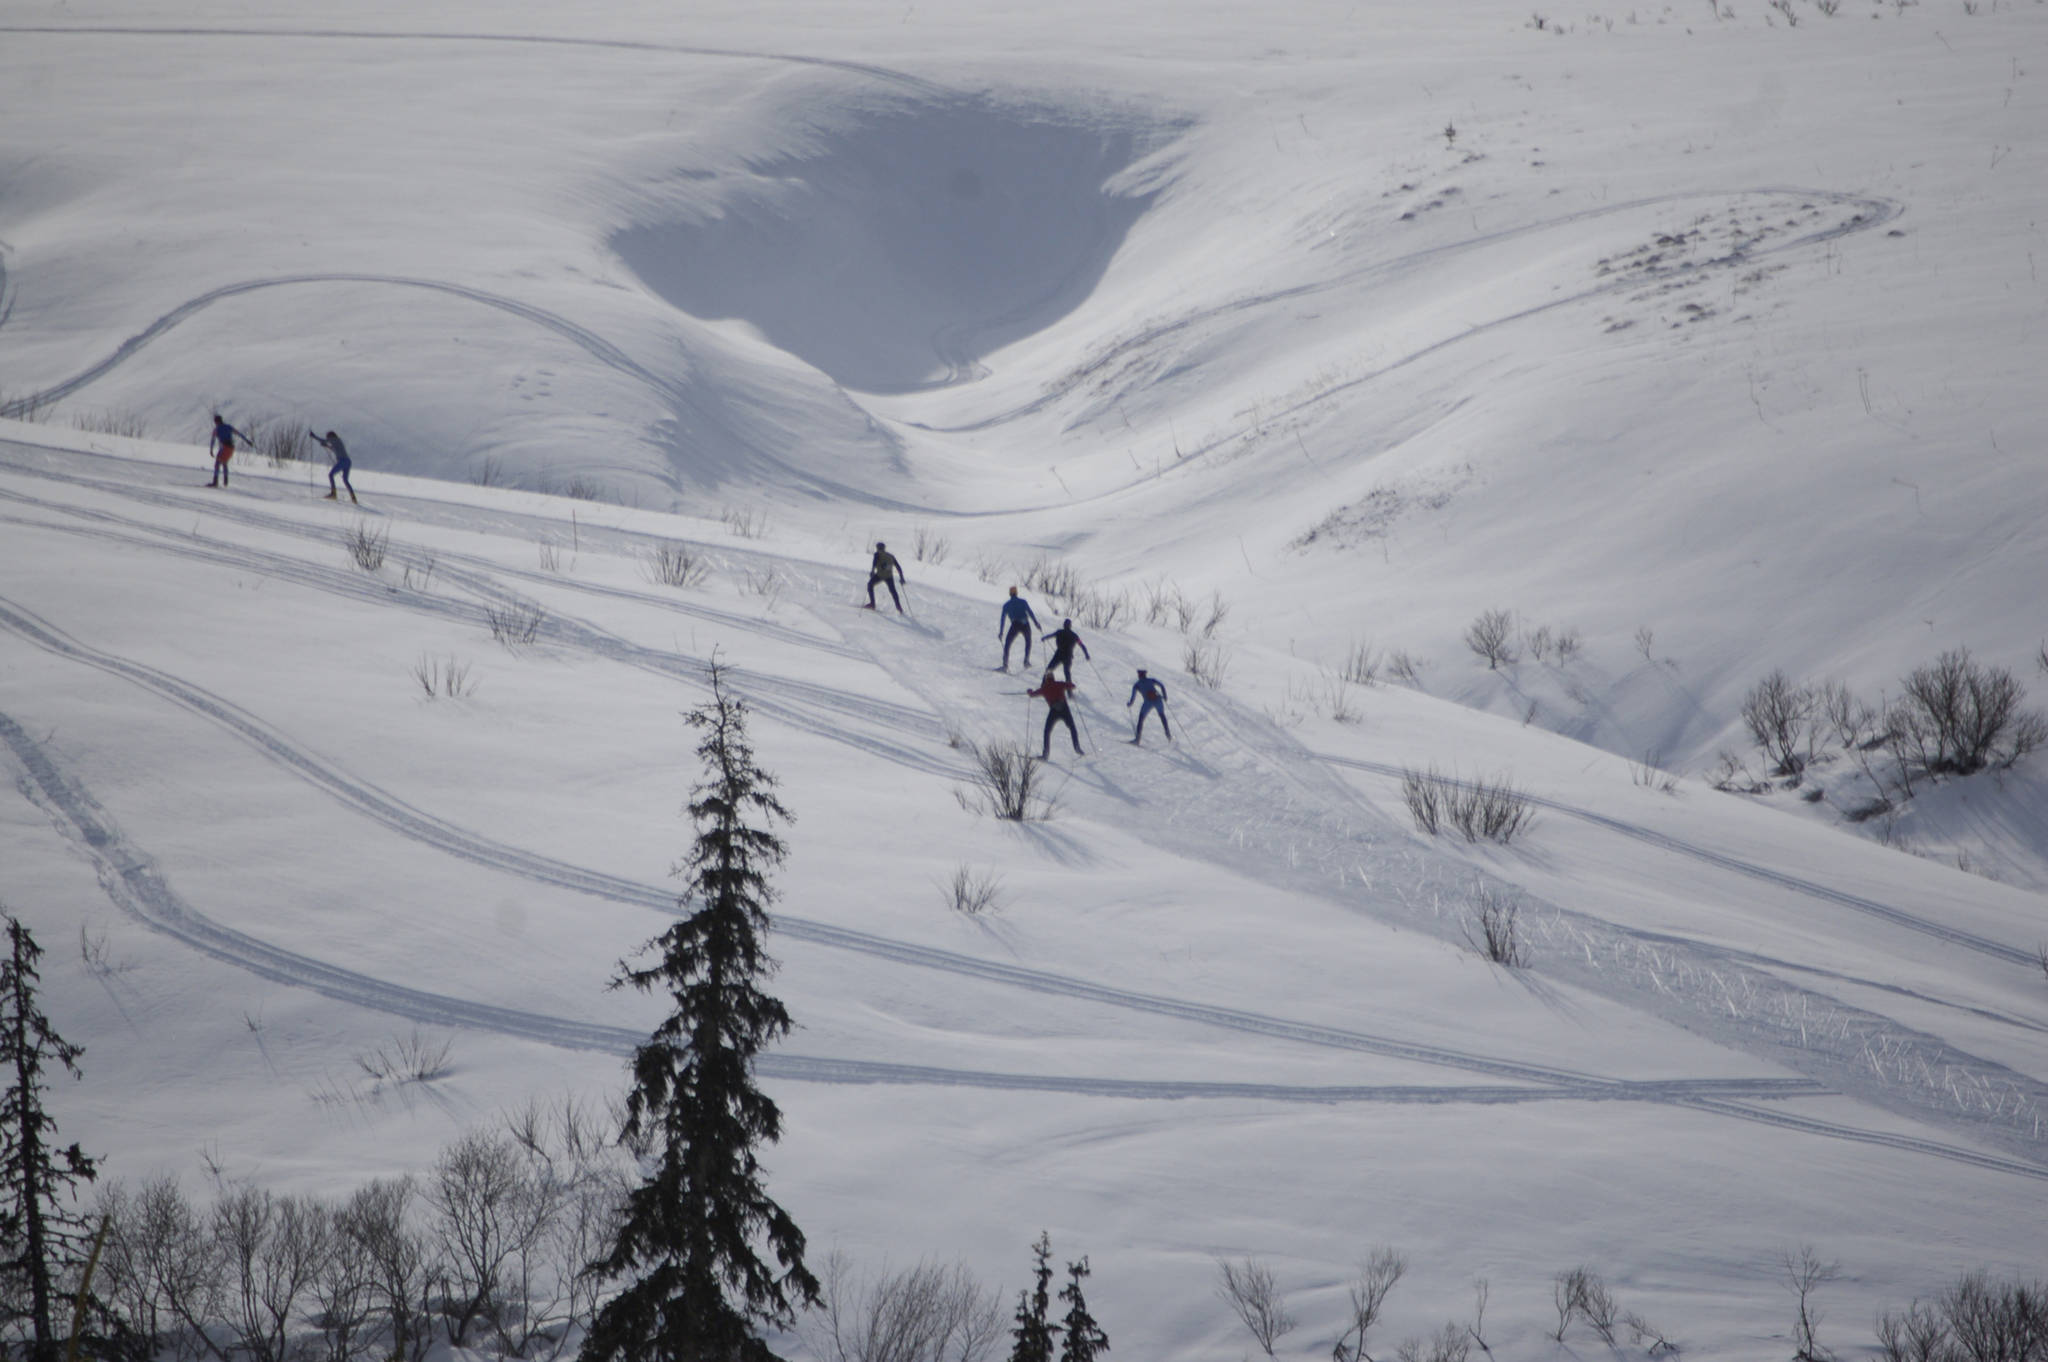 Skiers climb a hill near the start of the Kachemak Bay Marathon Ski Tour in March of 2007 near Homer, Alaska, in winter where Homer actually had snow. (Photo by Michael Armstrong/Homer News)